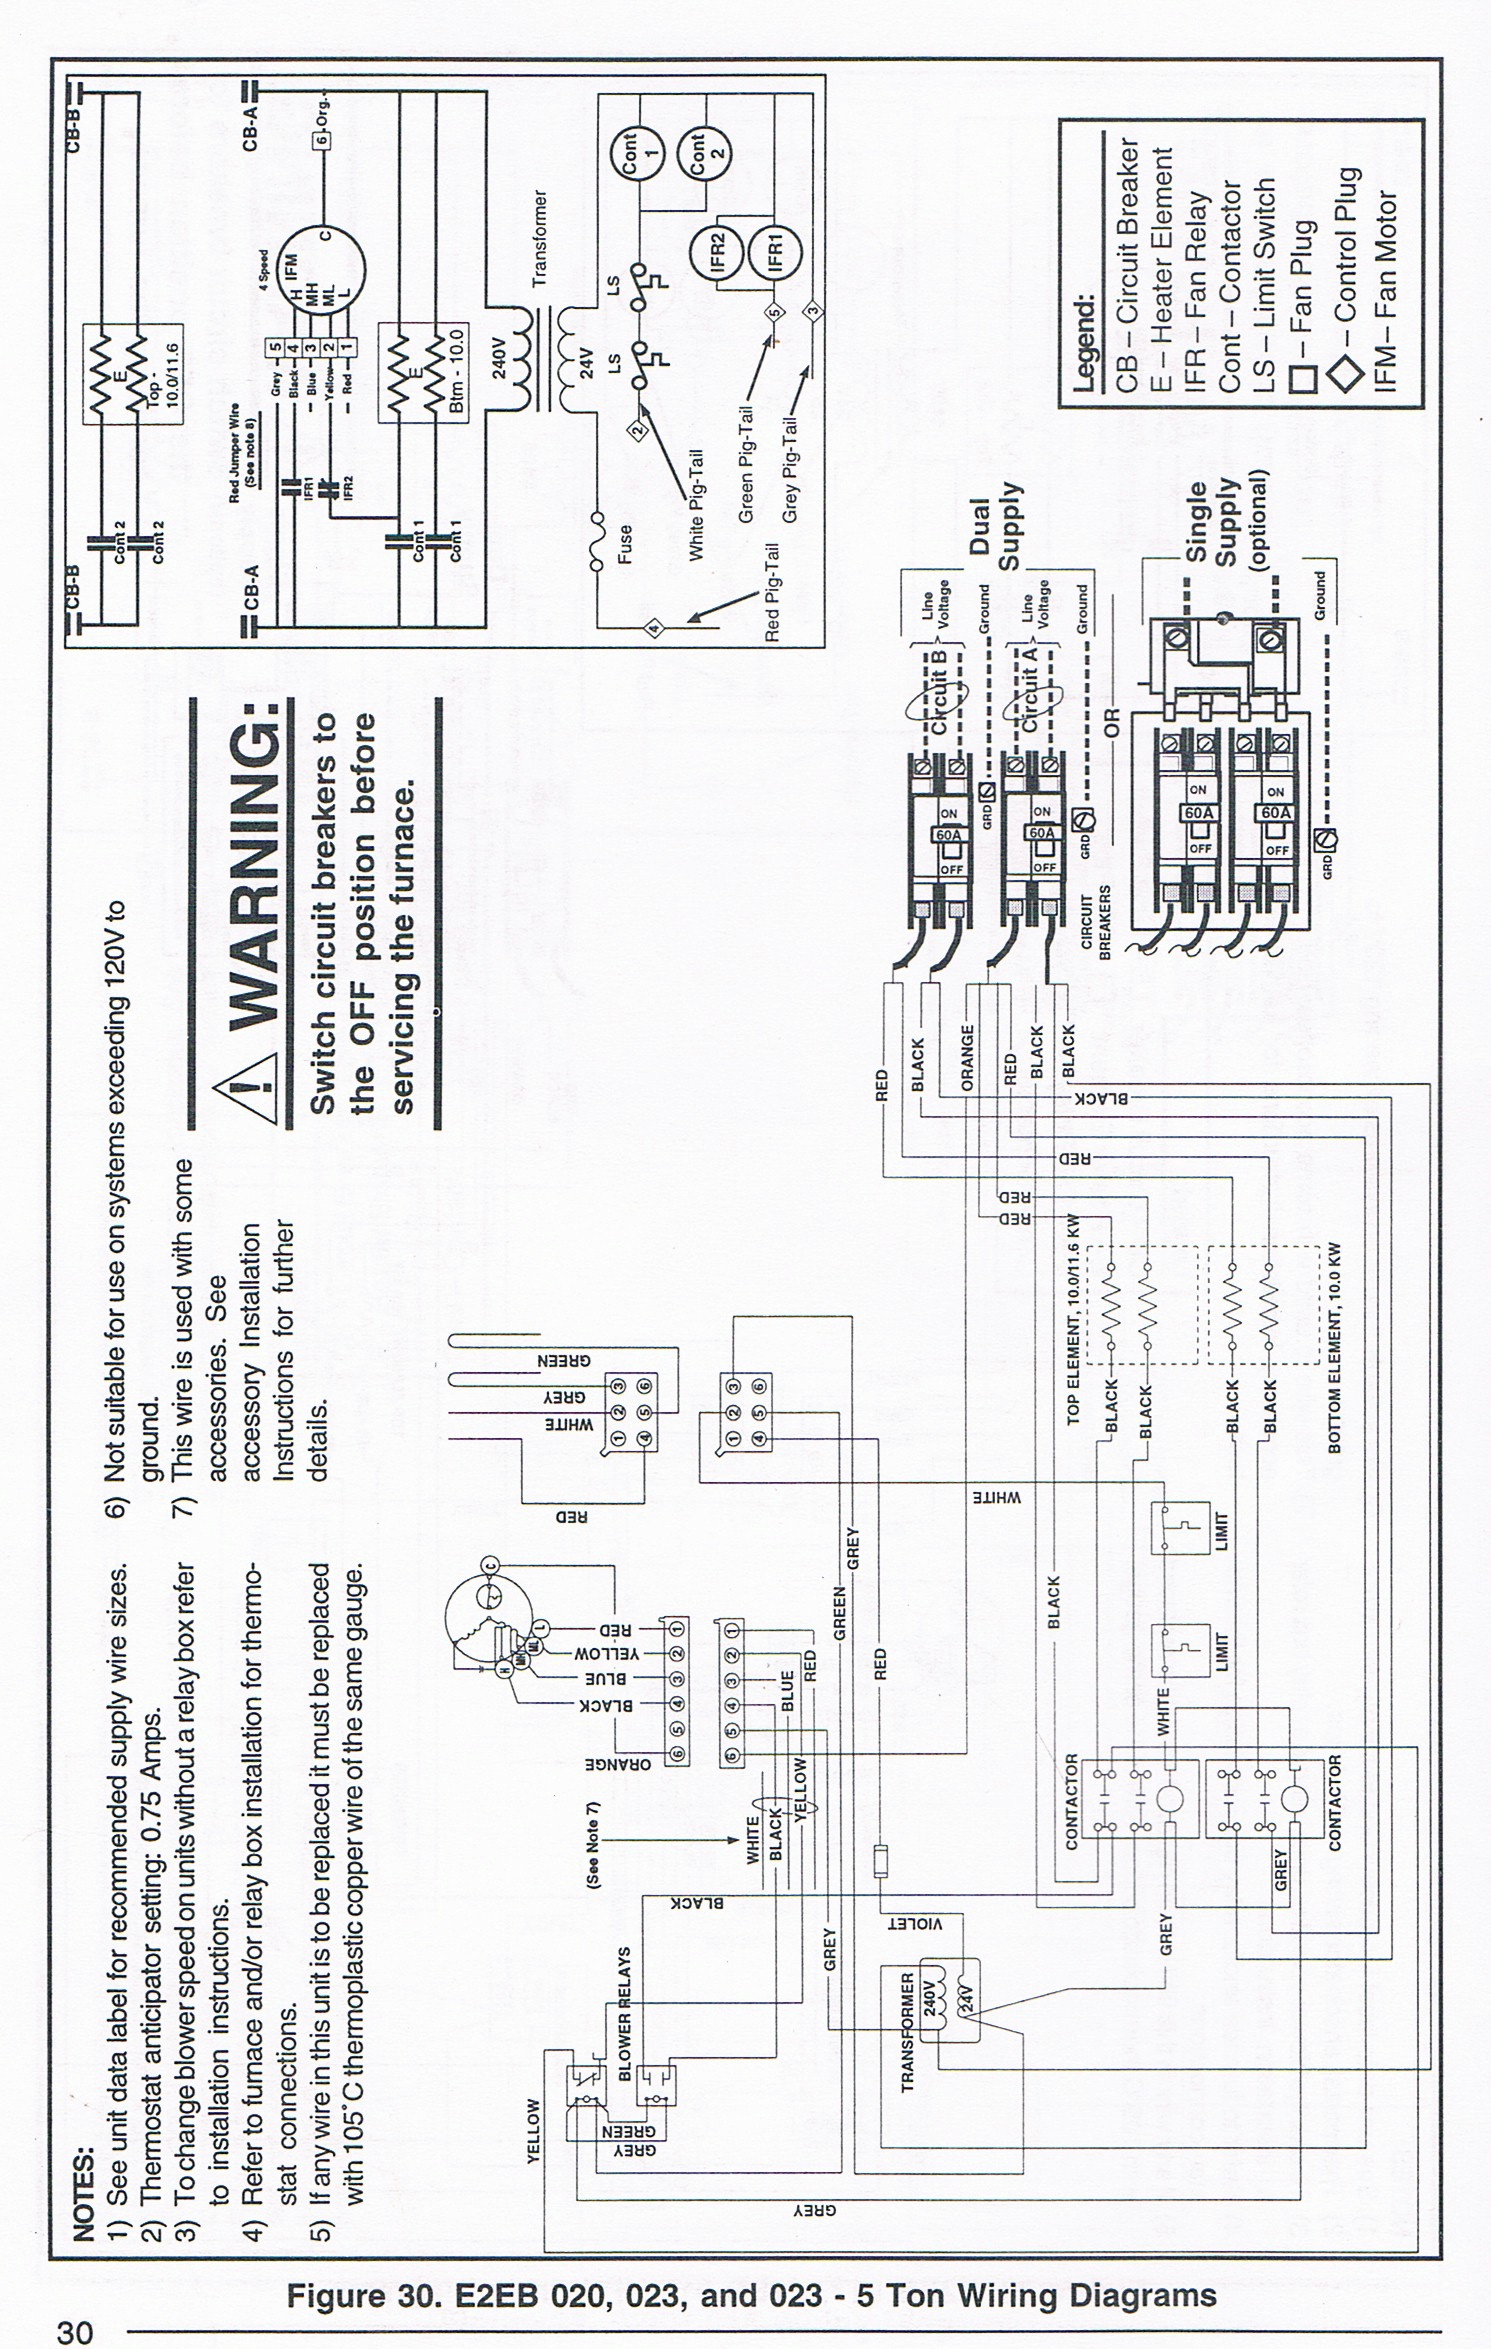 Wiring Diagram For Gas Furnace Thermostat from annawiringdiagram.com